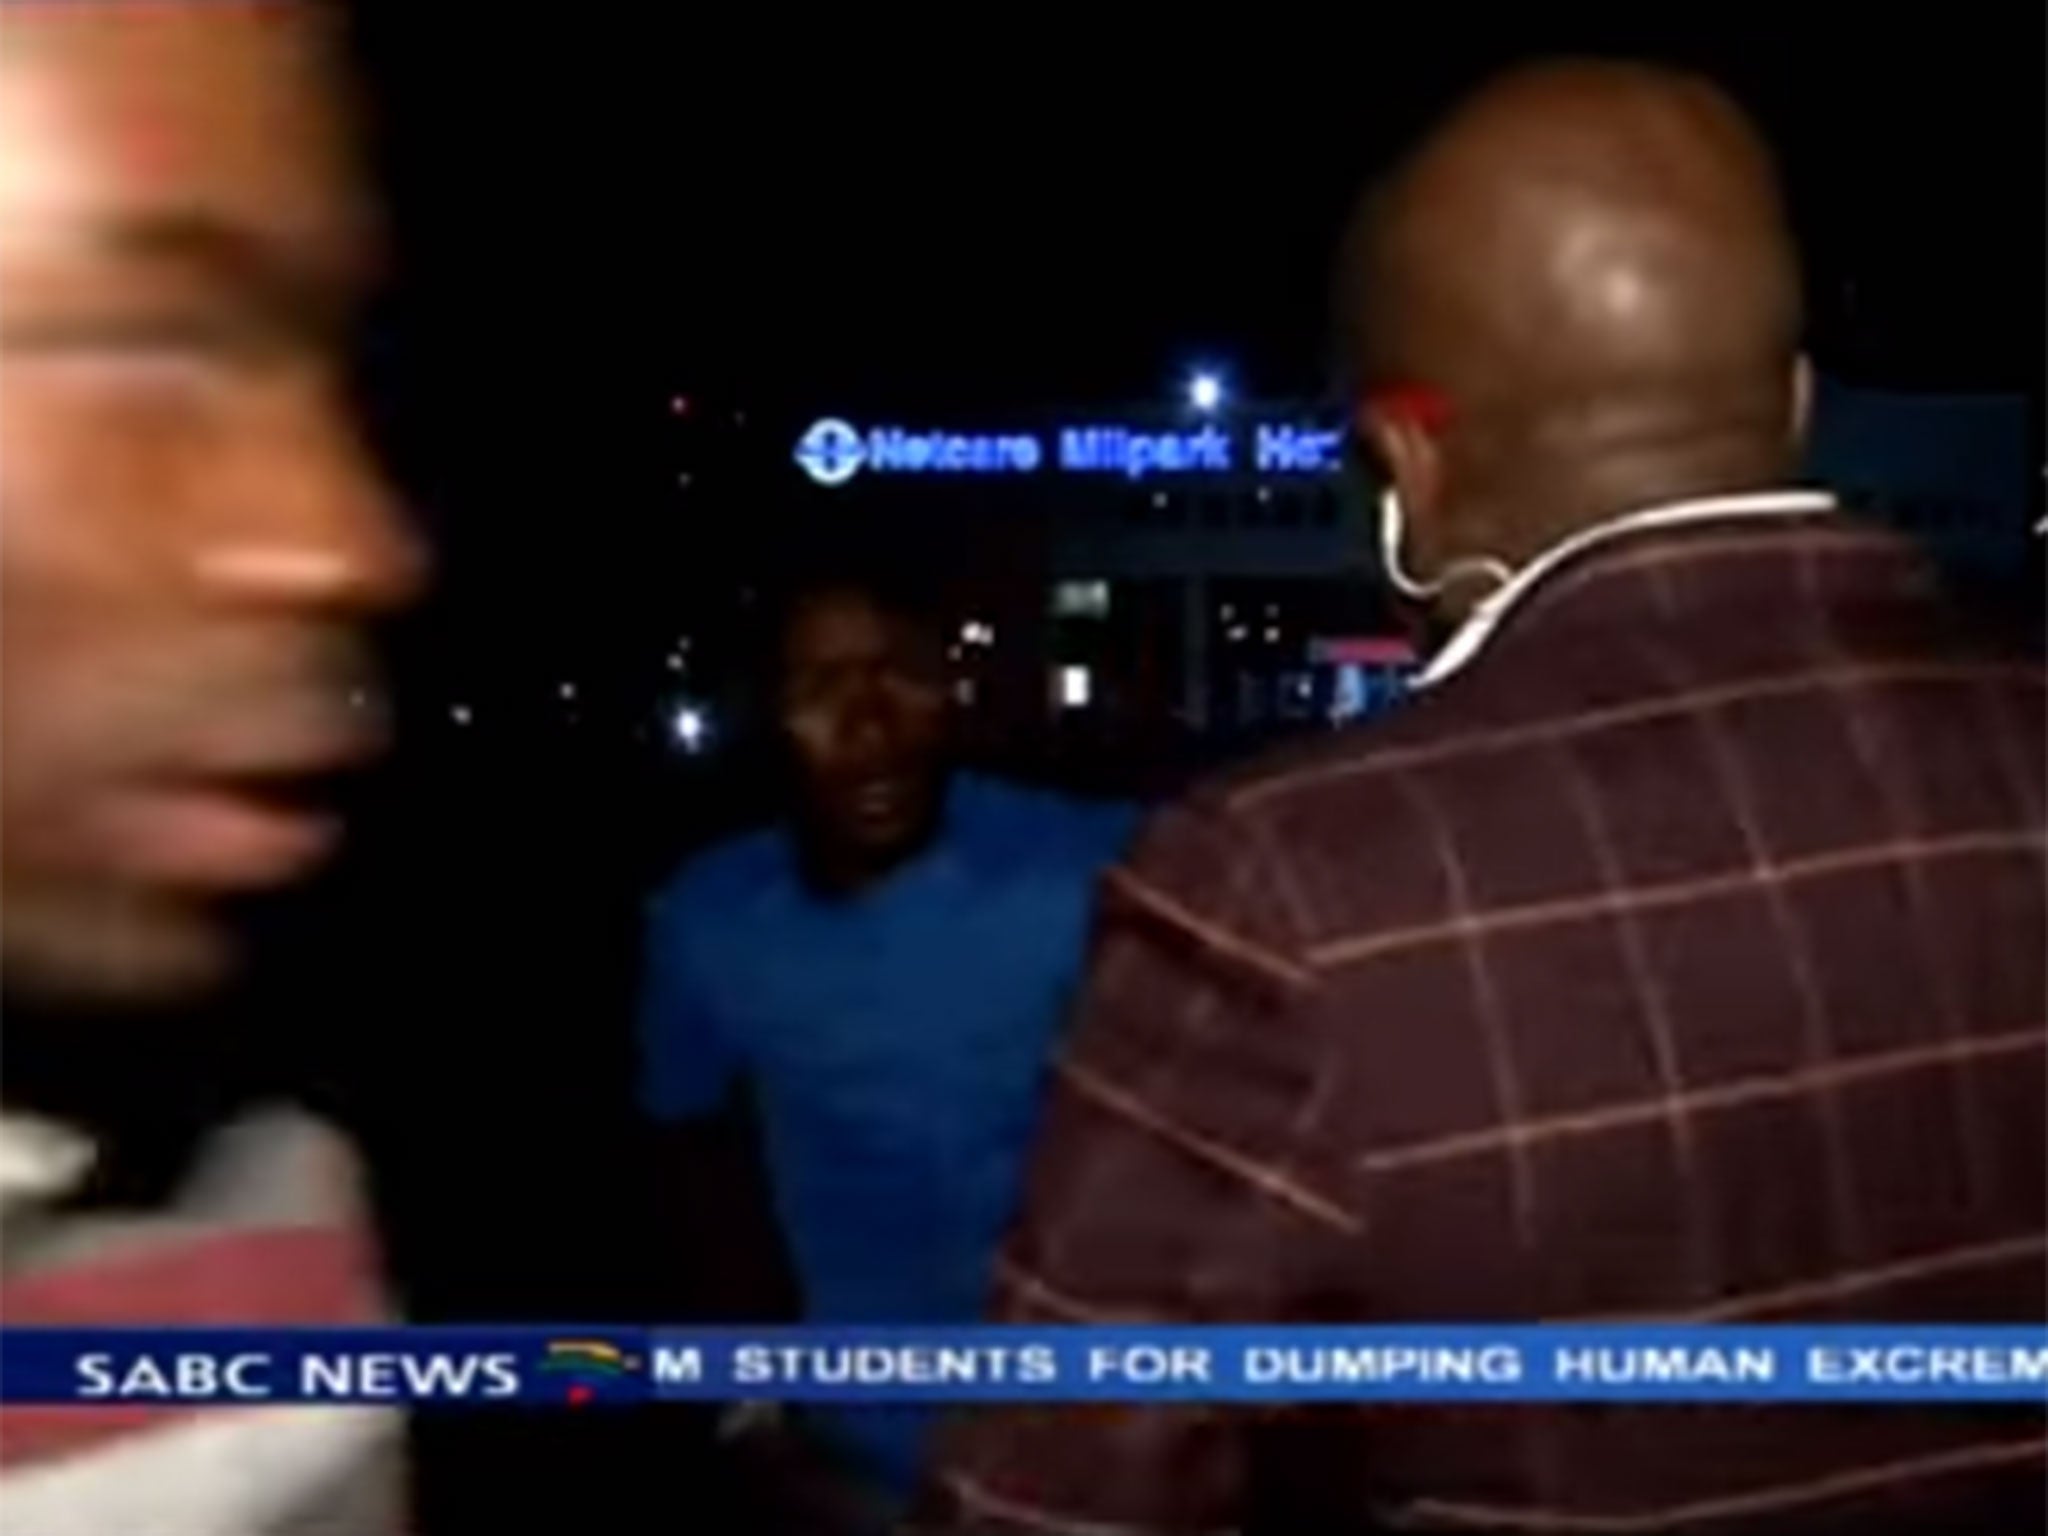 Vuyo Mvoko said that he was threatened by an armed man during the incident